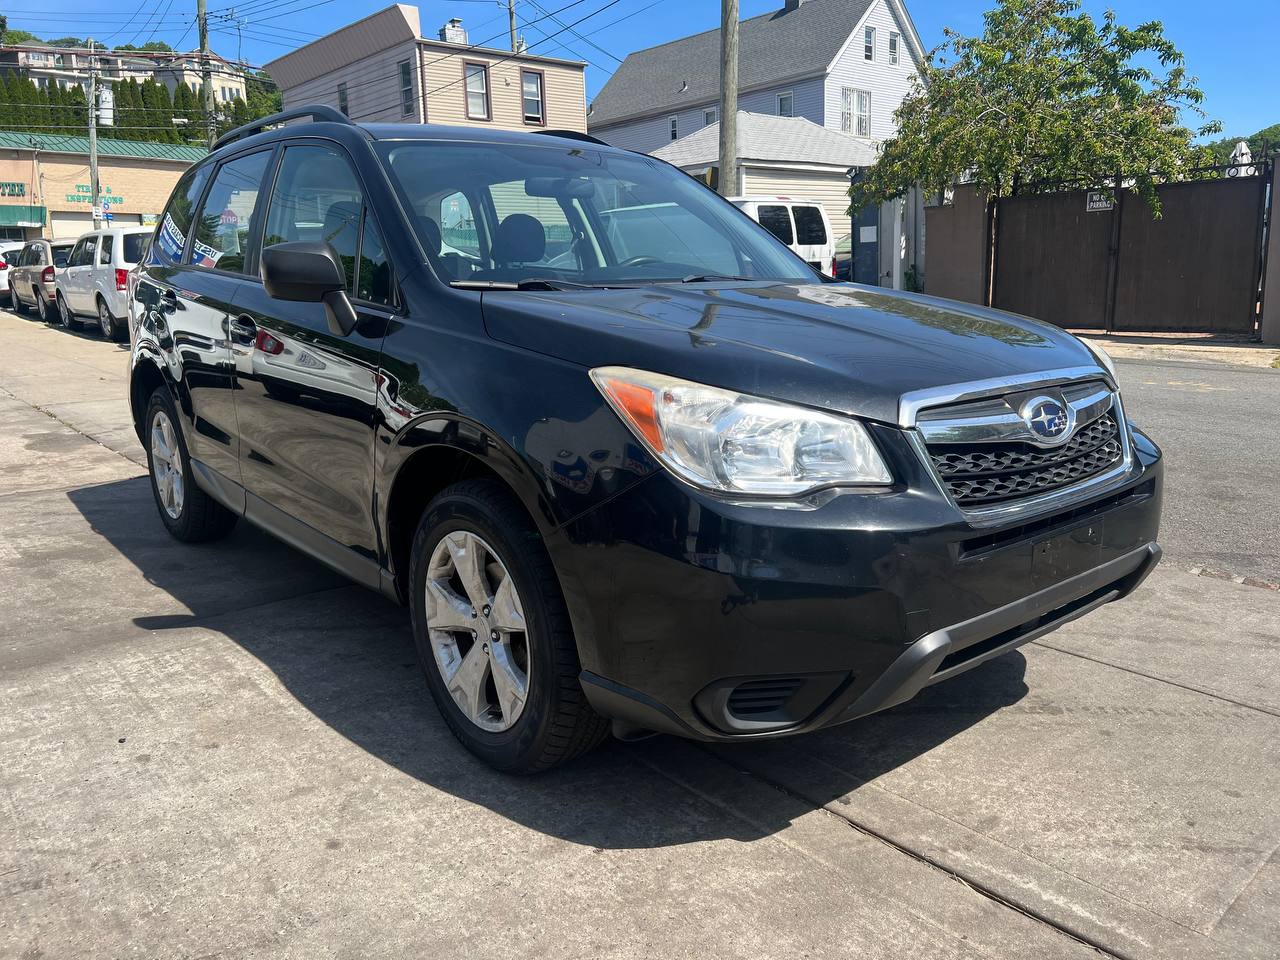 Used - Subaru Forester 2.5i AWD Wagon for sale in Staten Island NY